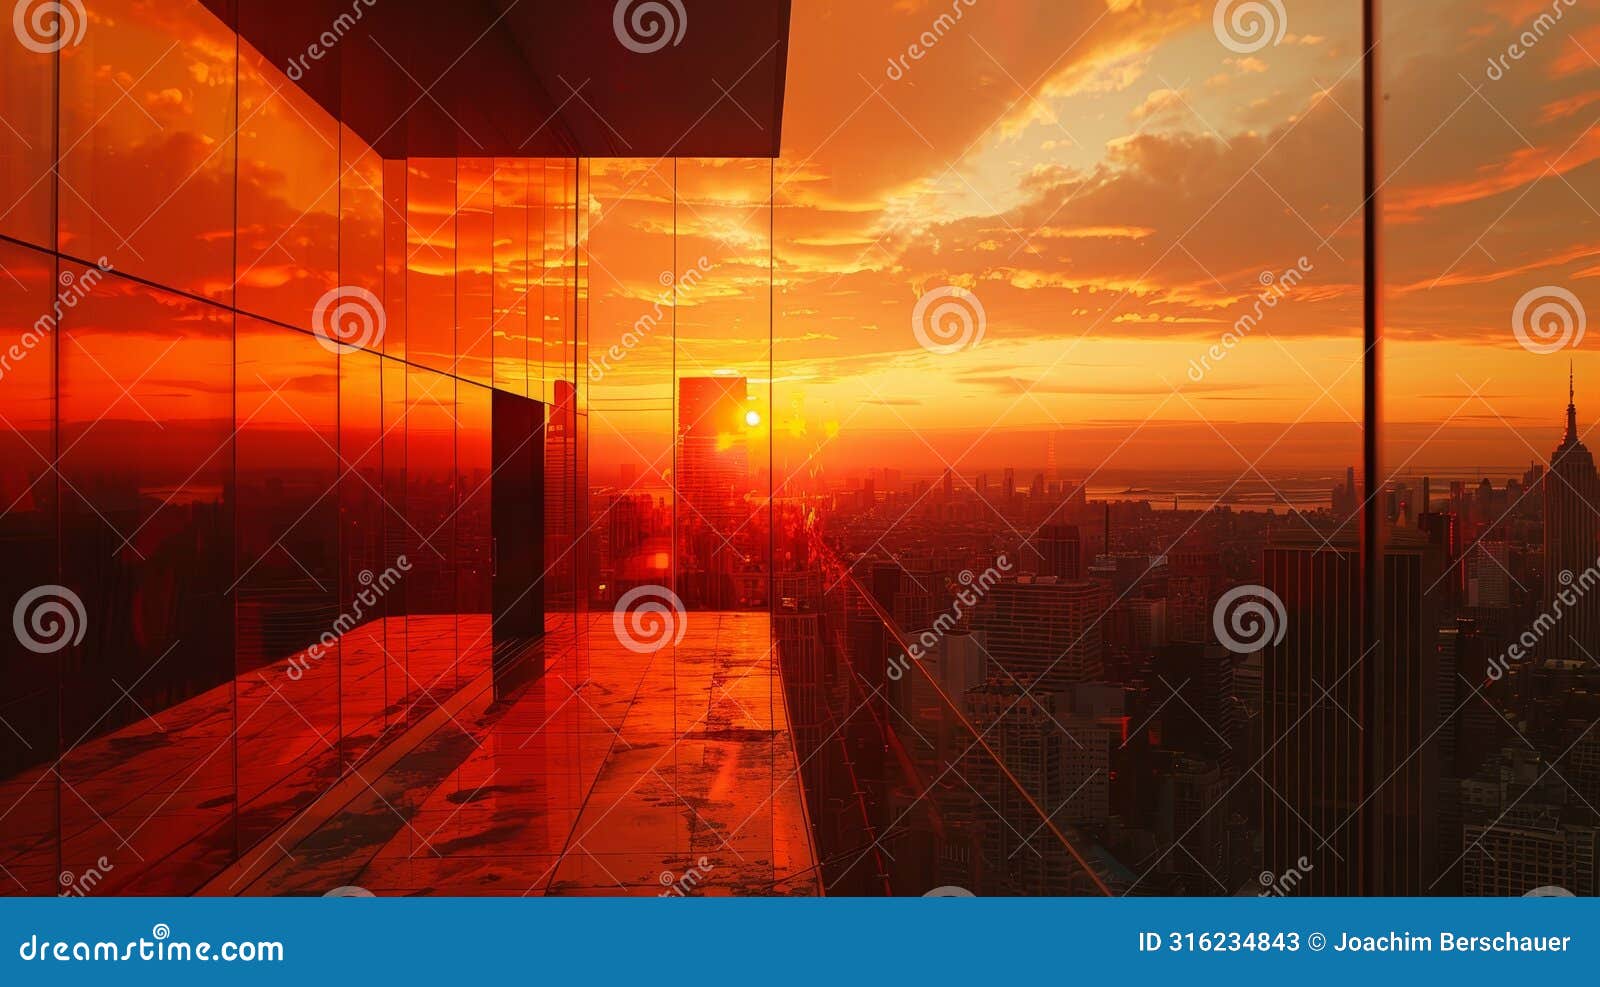 minimalist cityscape sunset tones, shadow silhouettes, exaggerated perspectives